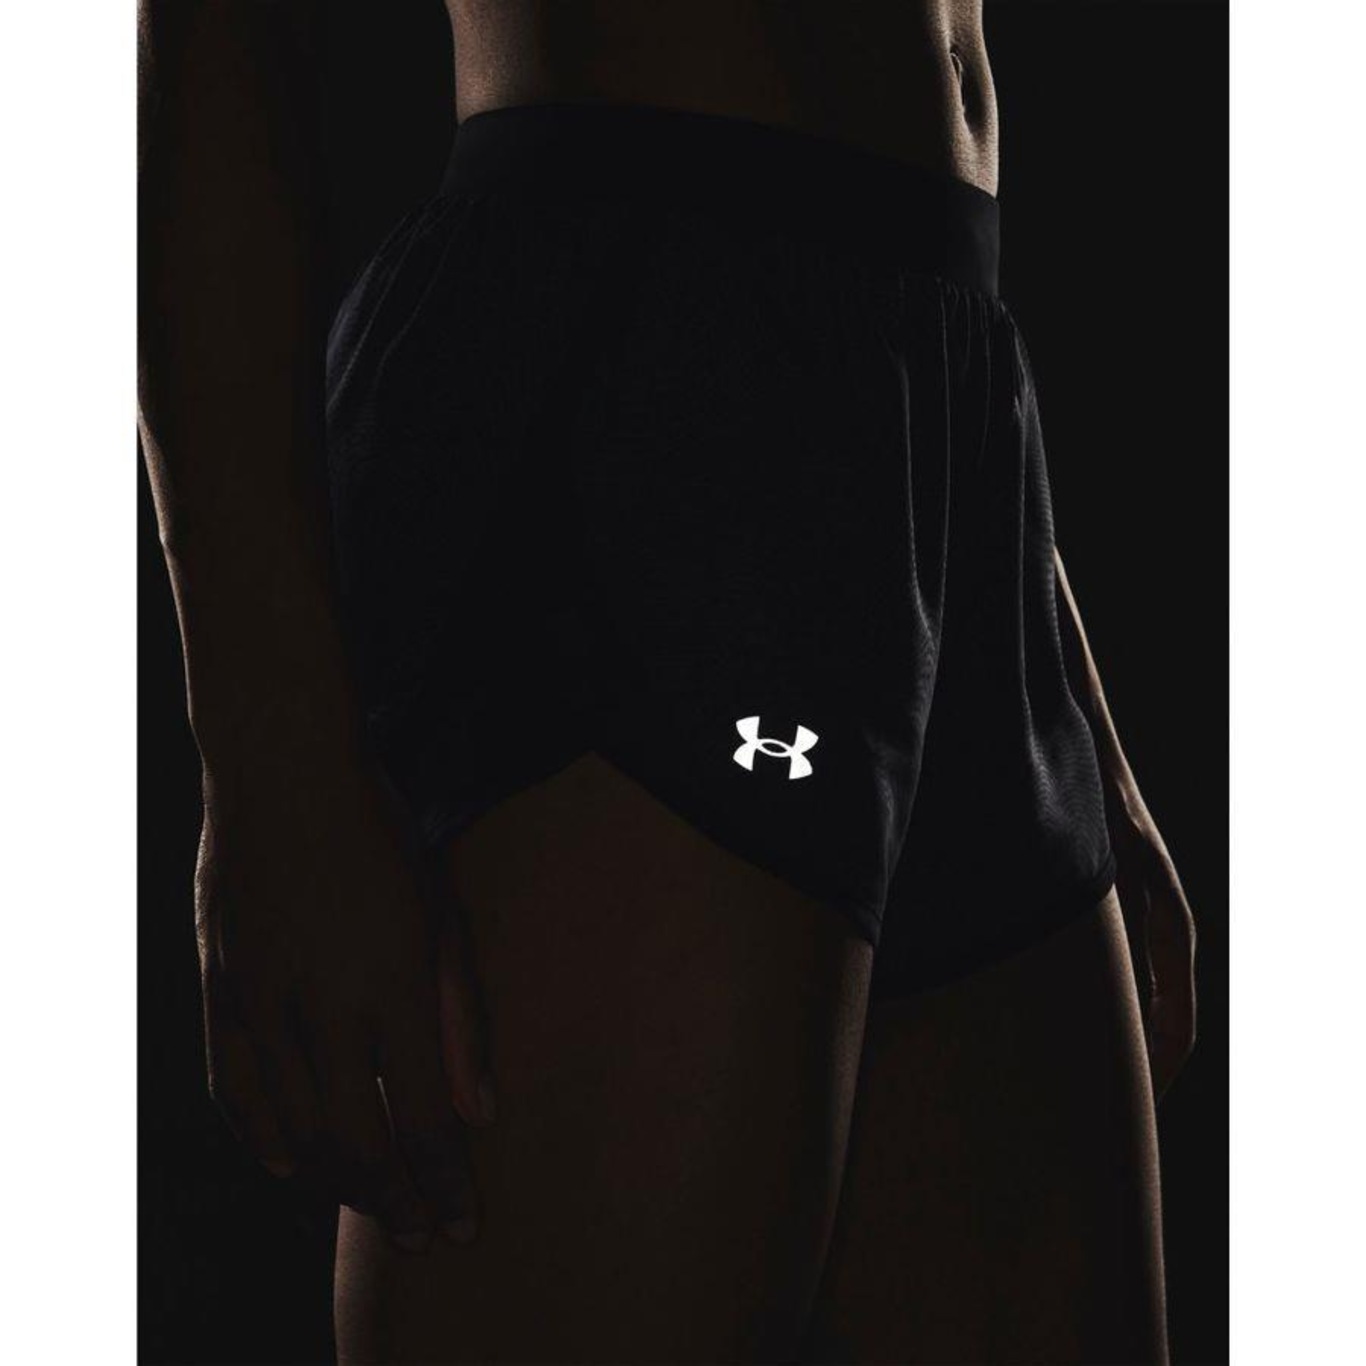  Under Armour Womens Fly by 2.0 Printed Running Shorts